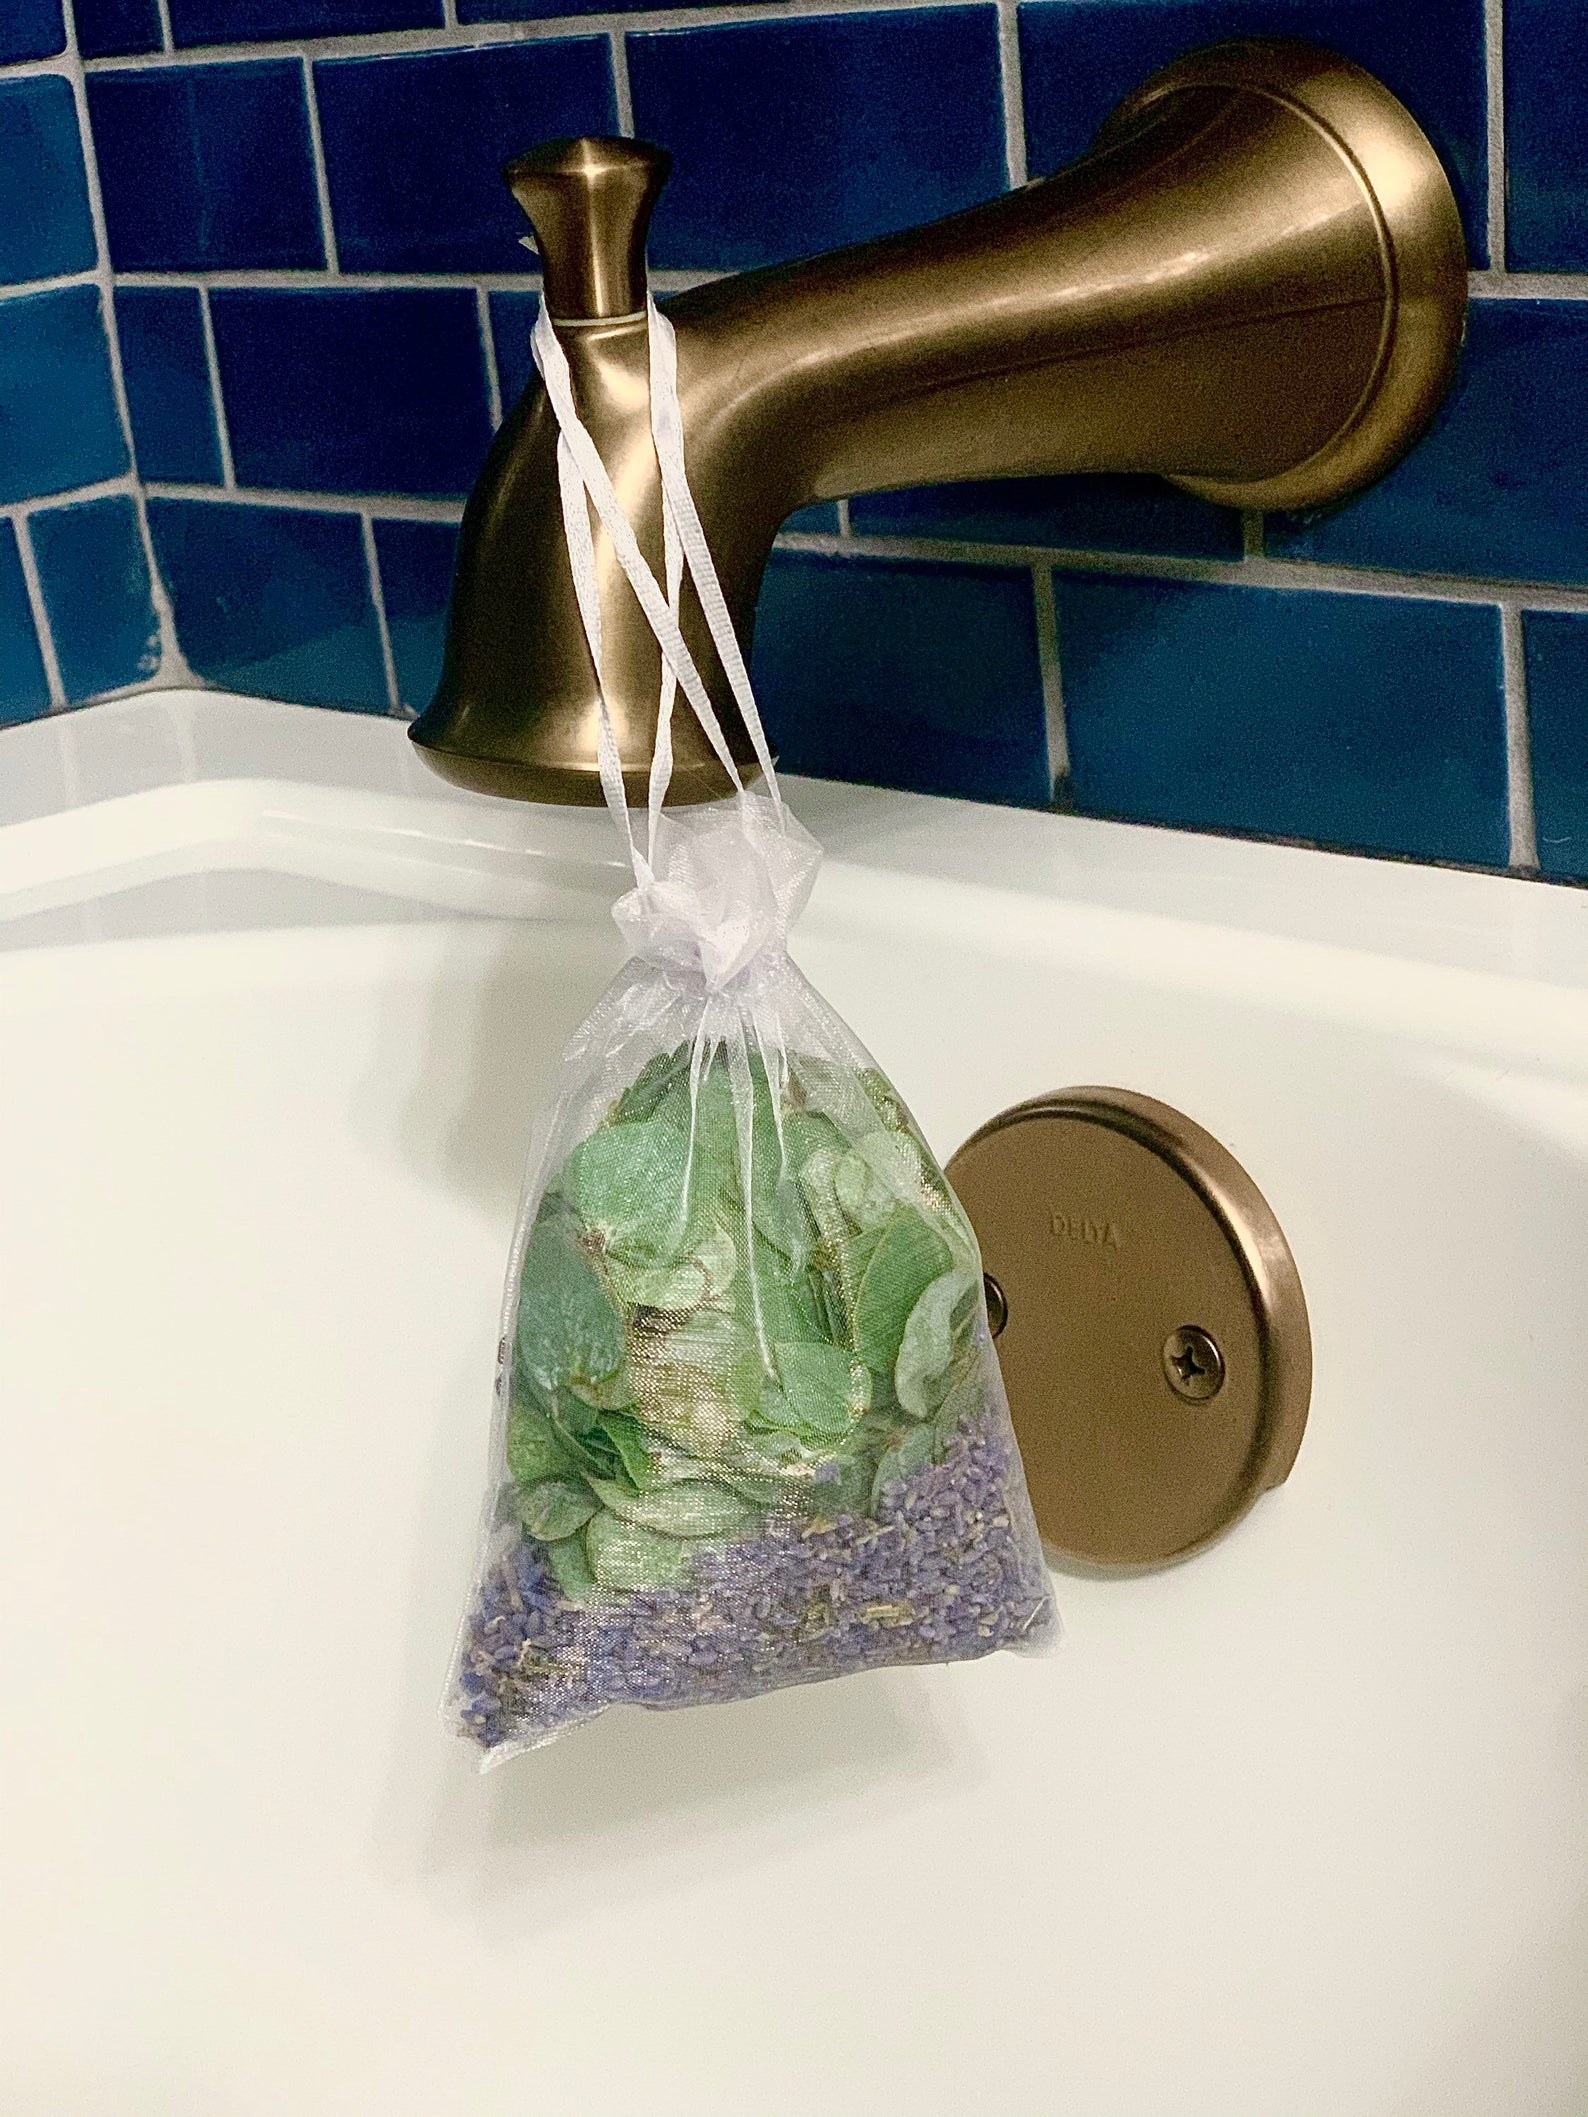 a sheer satchel with eucalyptus leaves and lavender seeds in it hanging from a bathtub faucet